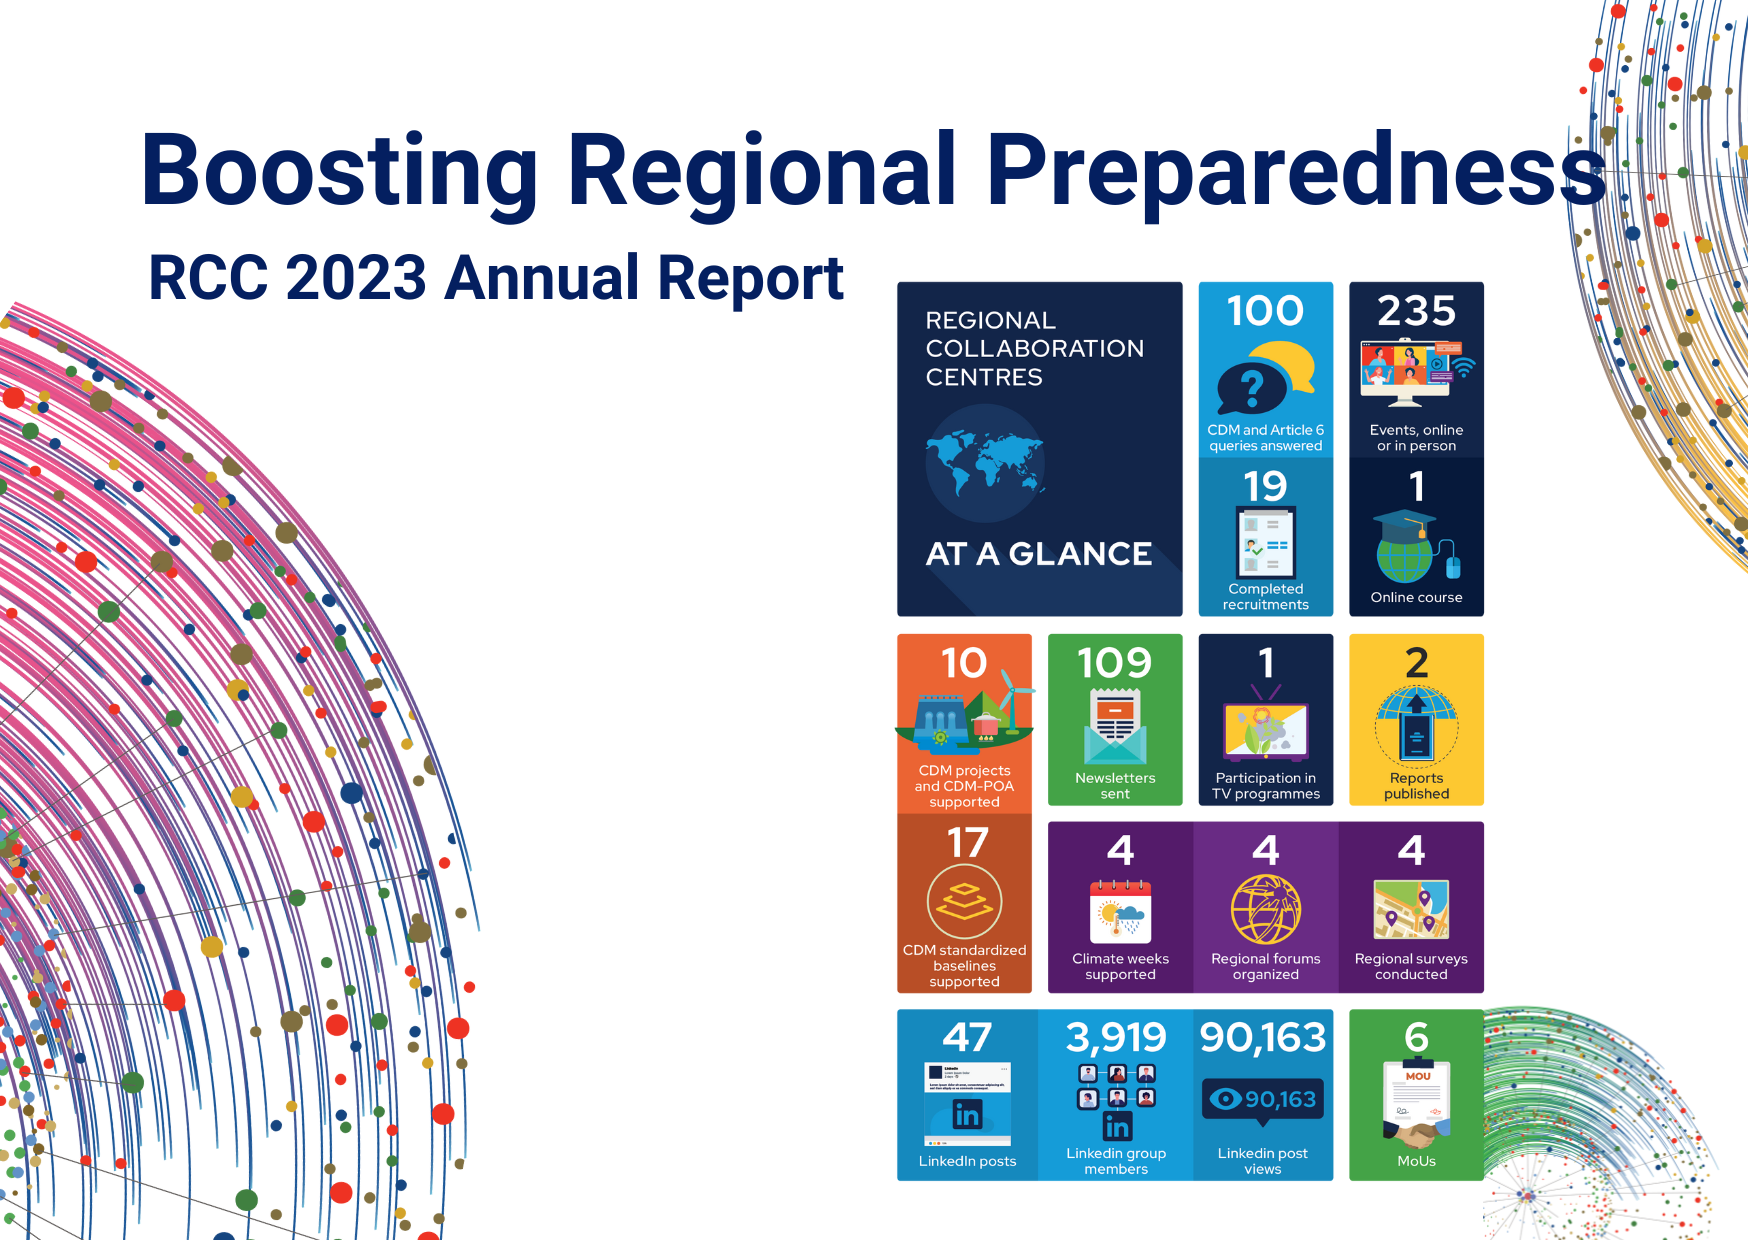 RCC Annual Report 2023 published! The card represents the global achievements of the RCCs in figrures. 